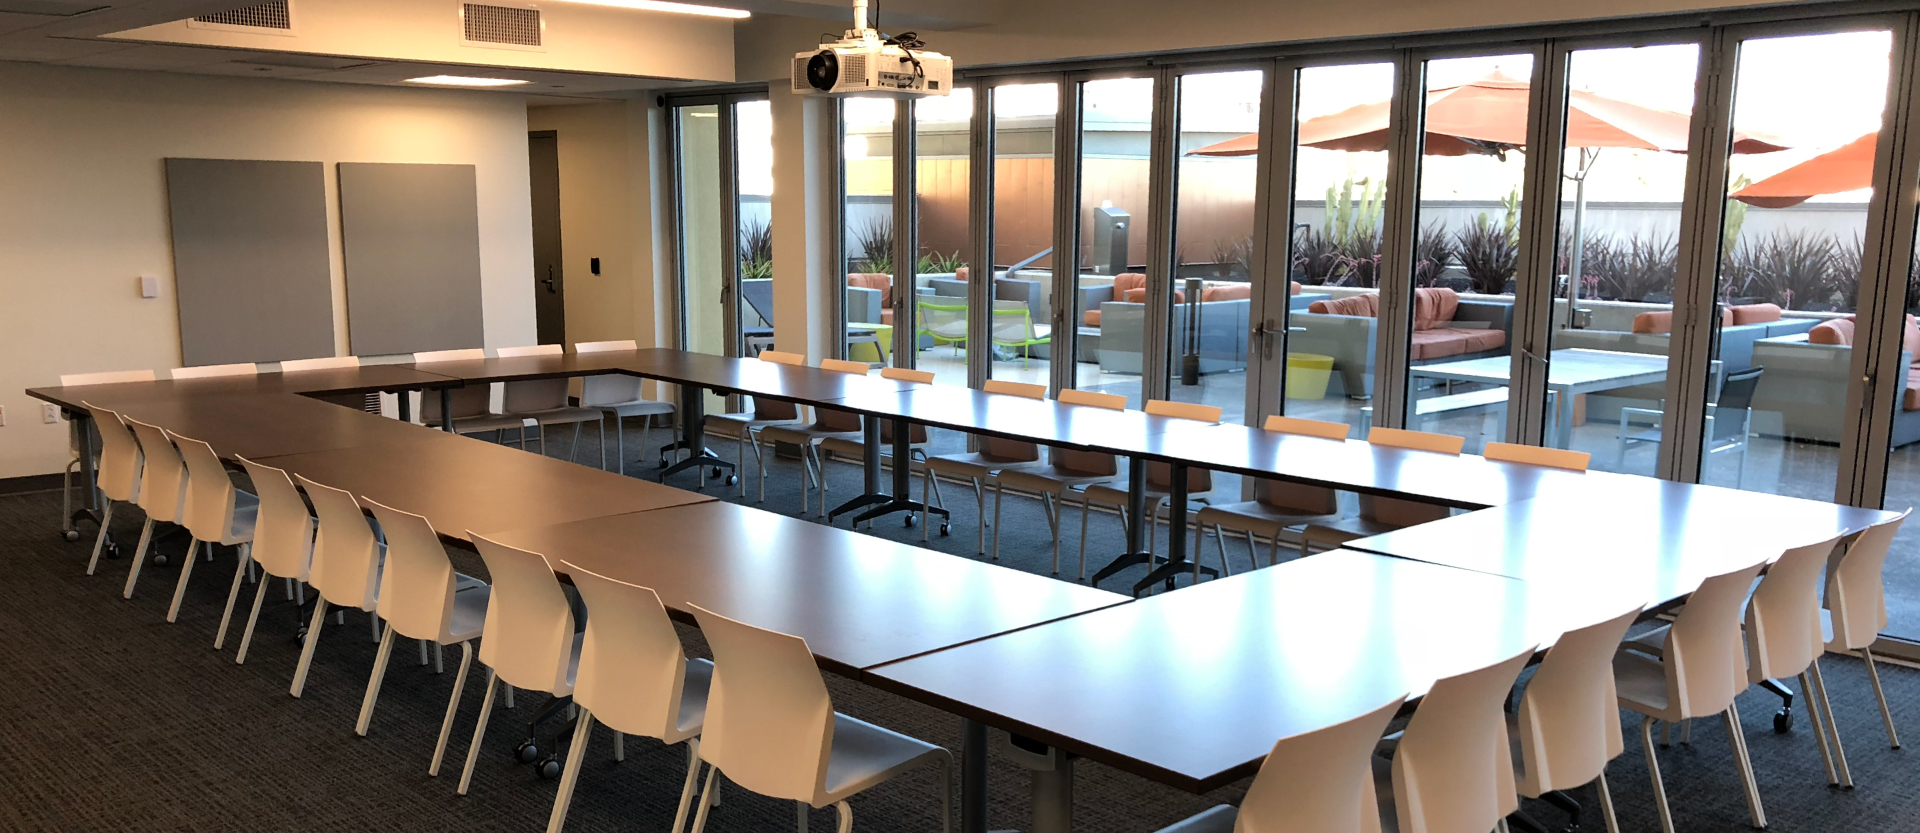 South Campus Plaza - Conference Room